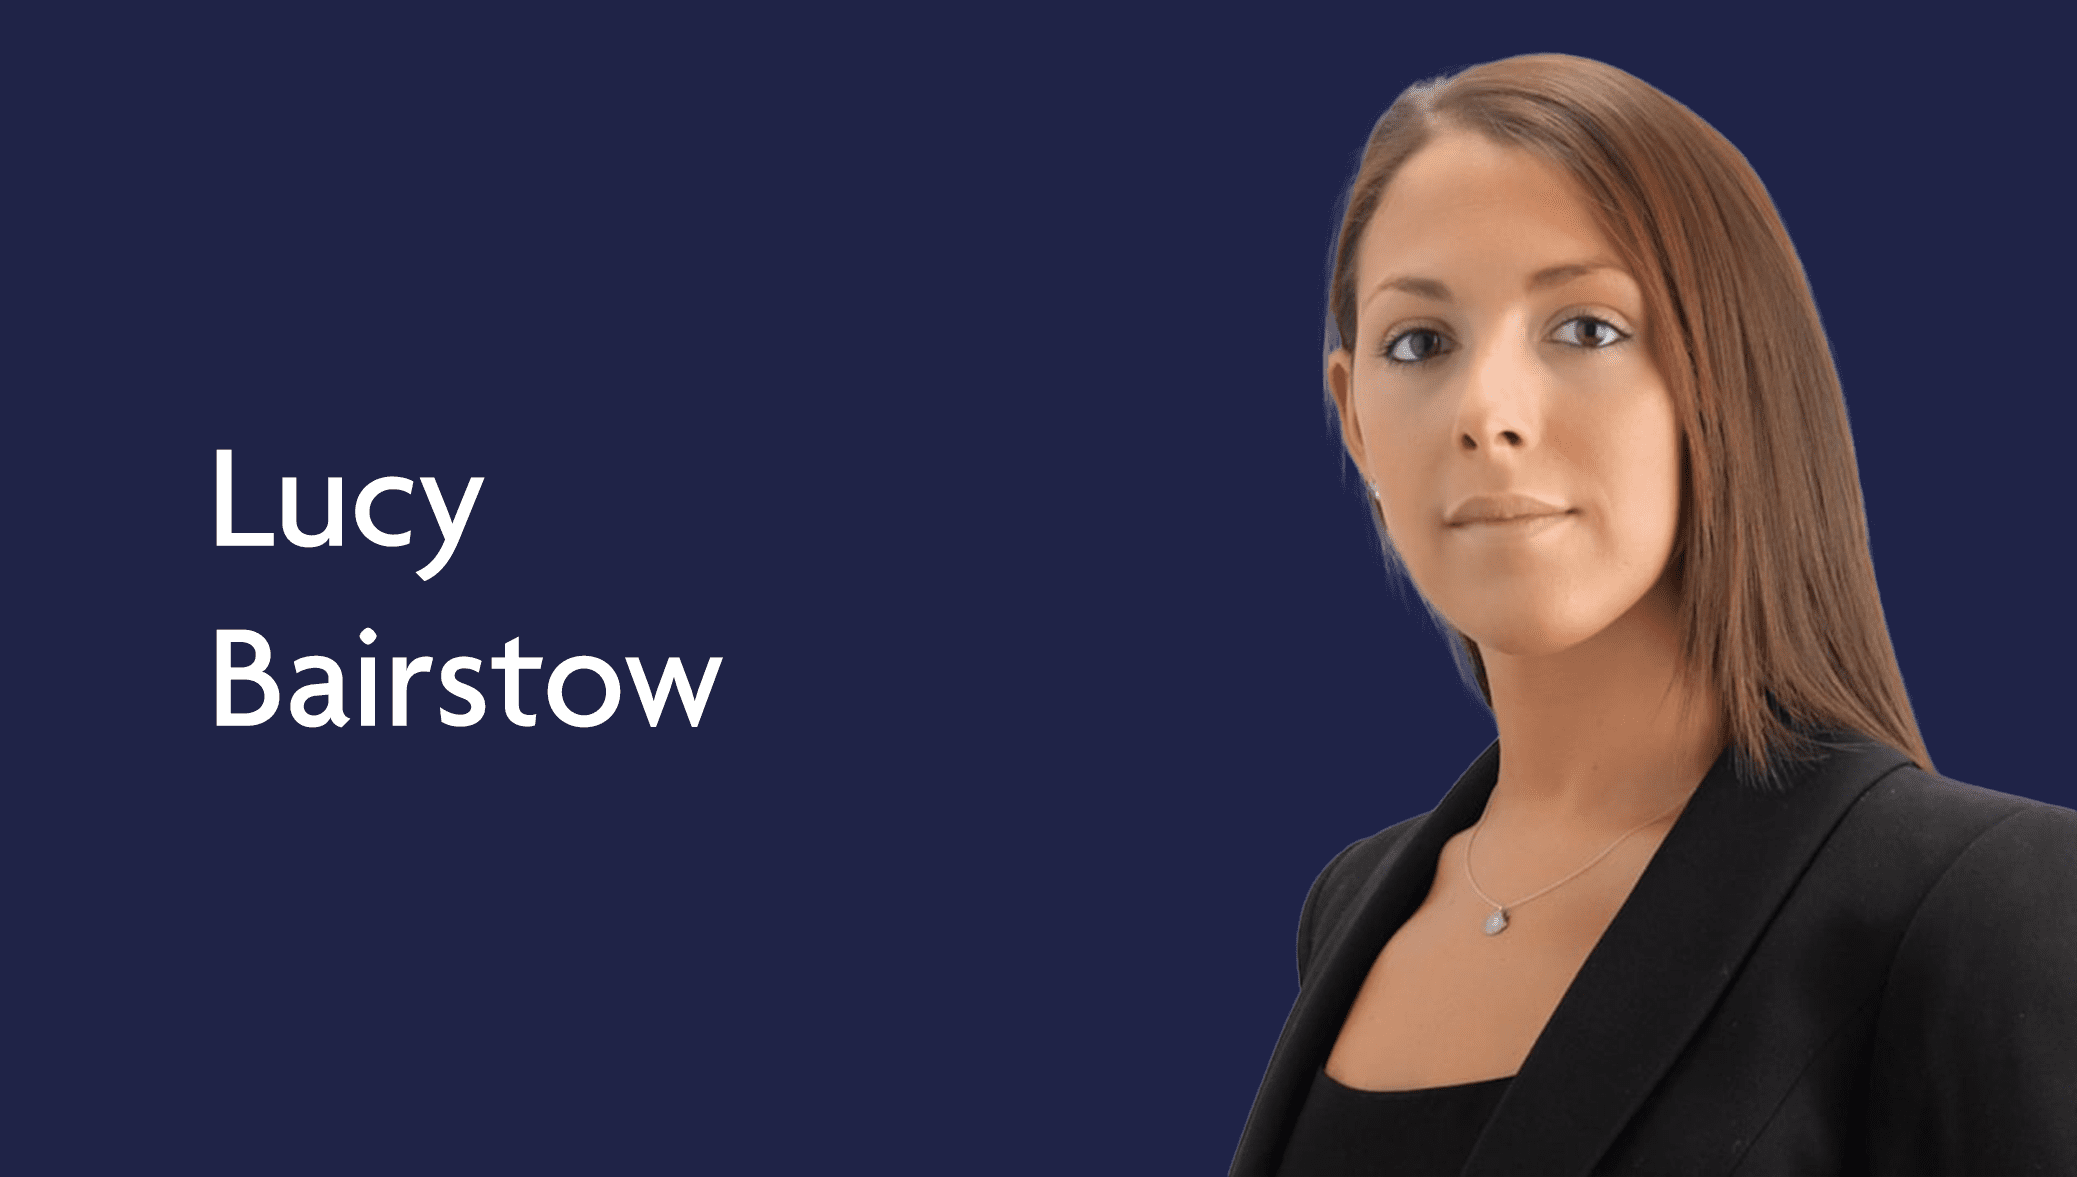 Welcome back Lucy Bairstow